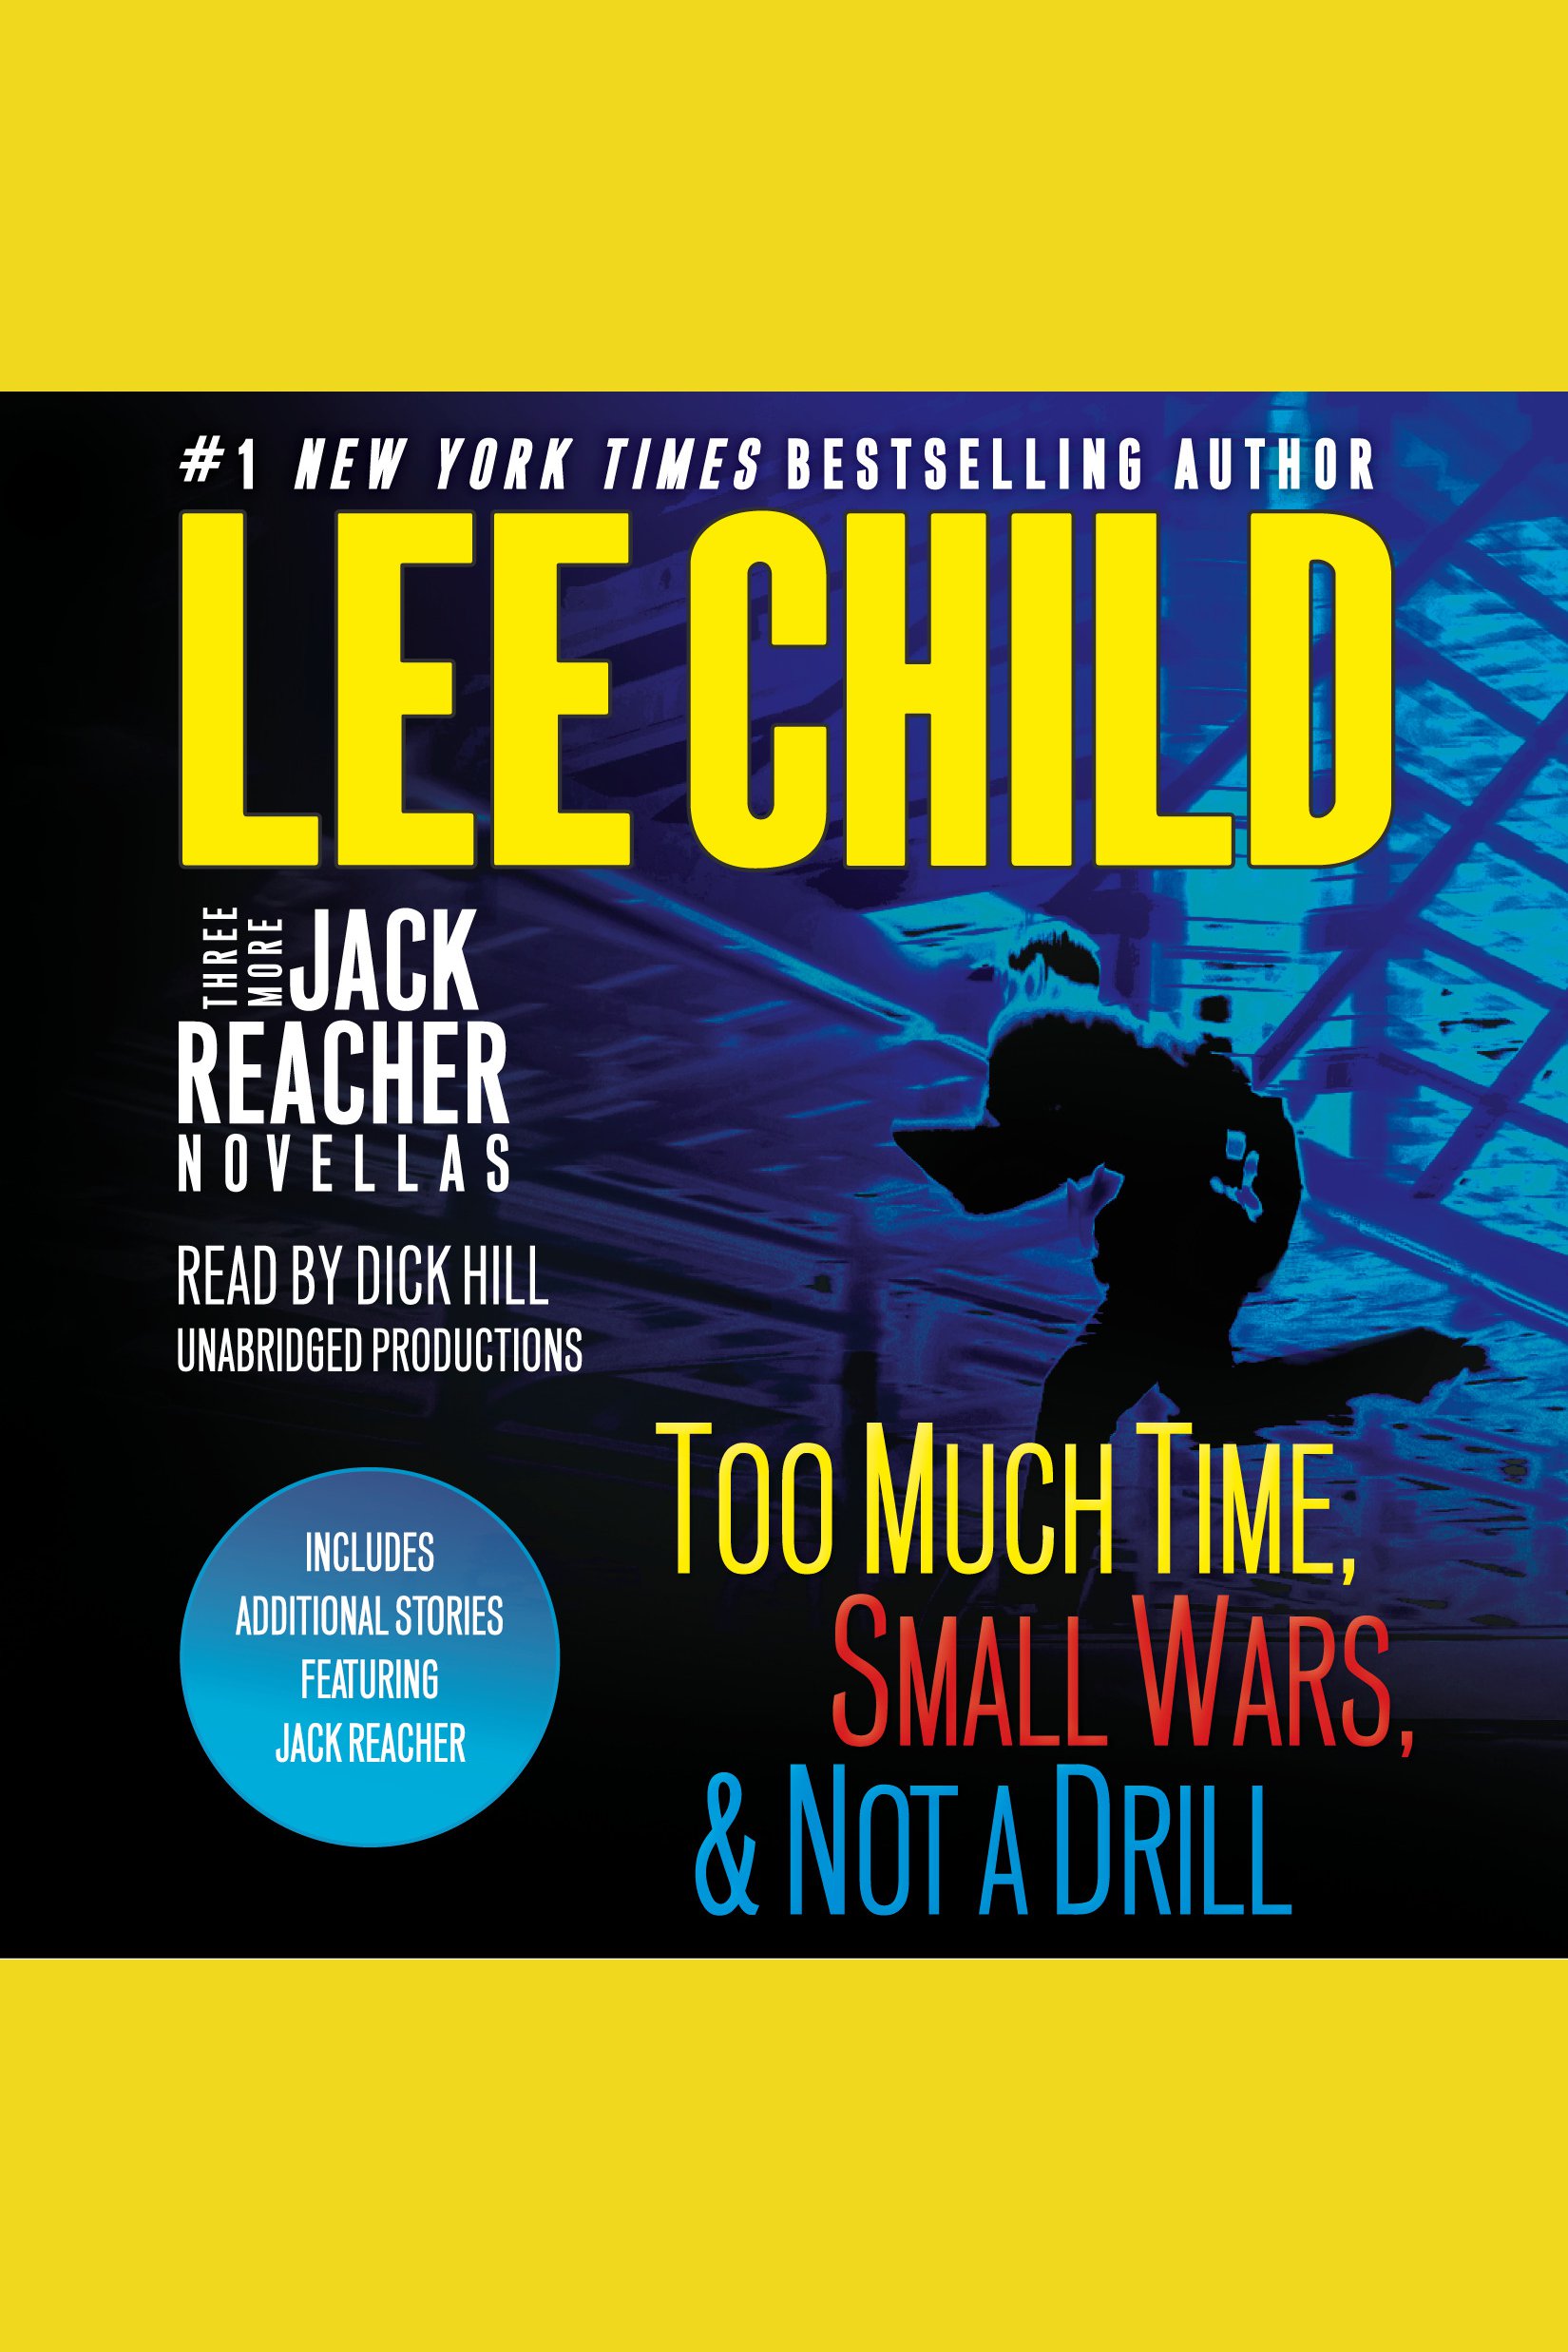 Umschlagbild für Three More Jack Reacher Novellas [electronic resource] : Too Much Time, Small Wars, Not a Drill, Plus Additional Stories